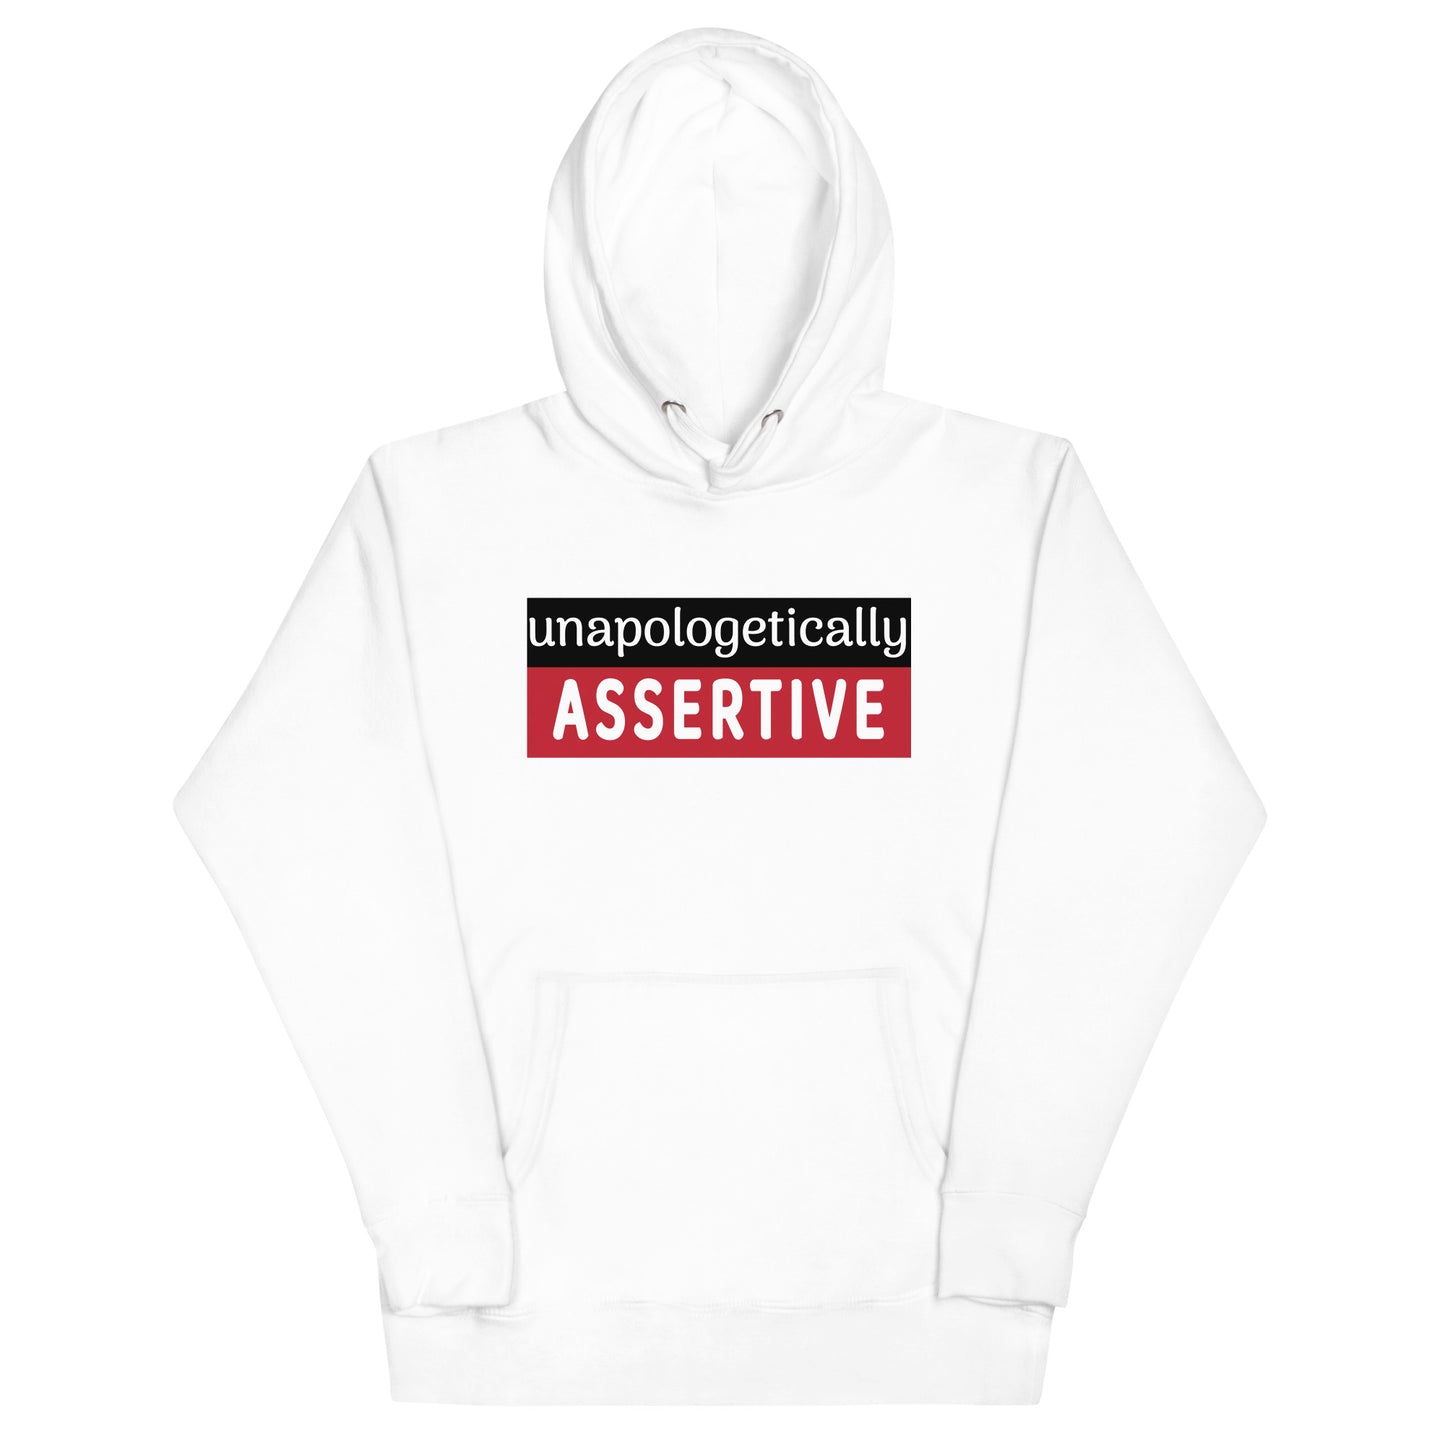 Unapologetically Assertive Hoodie